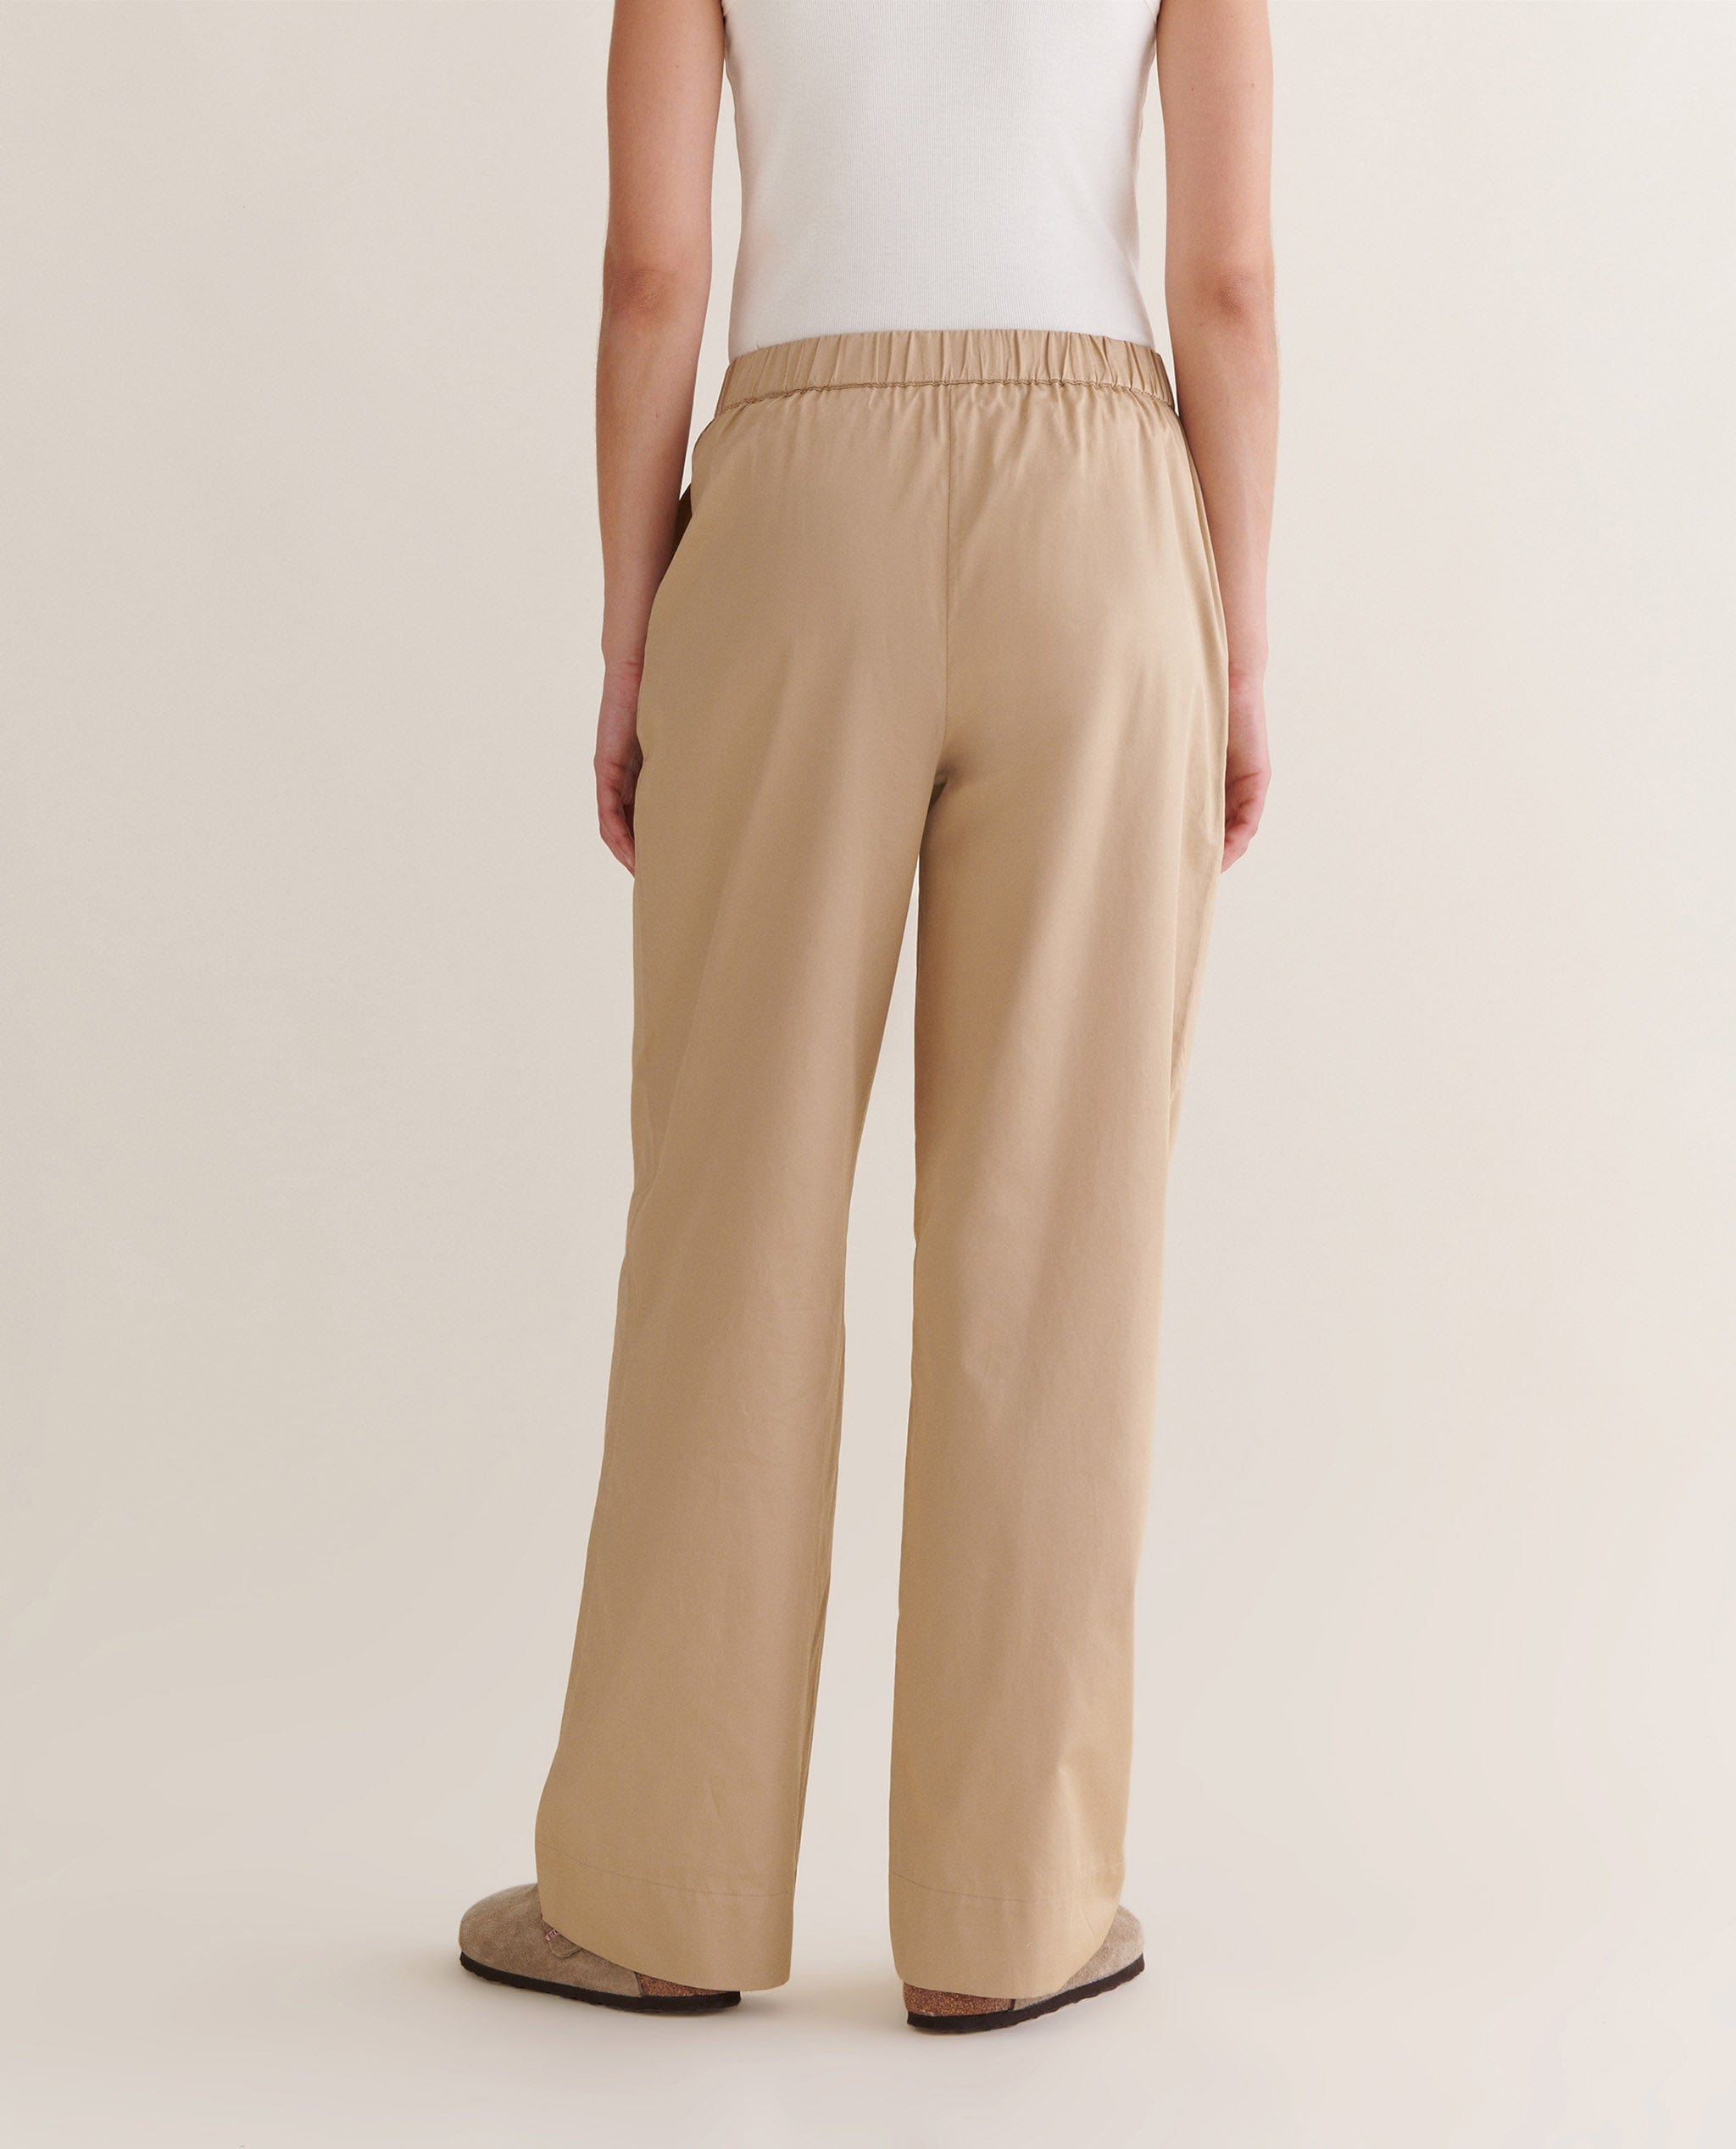 White cotton poplin trousers - Collagerie